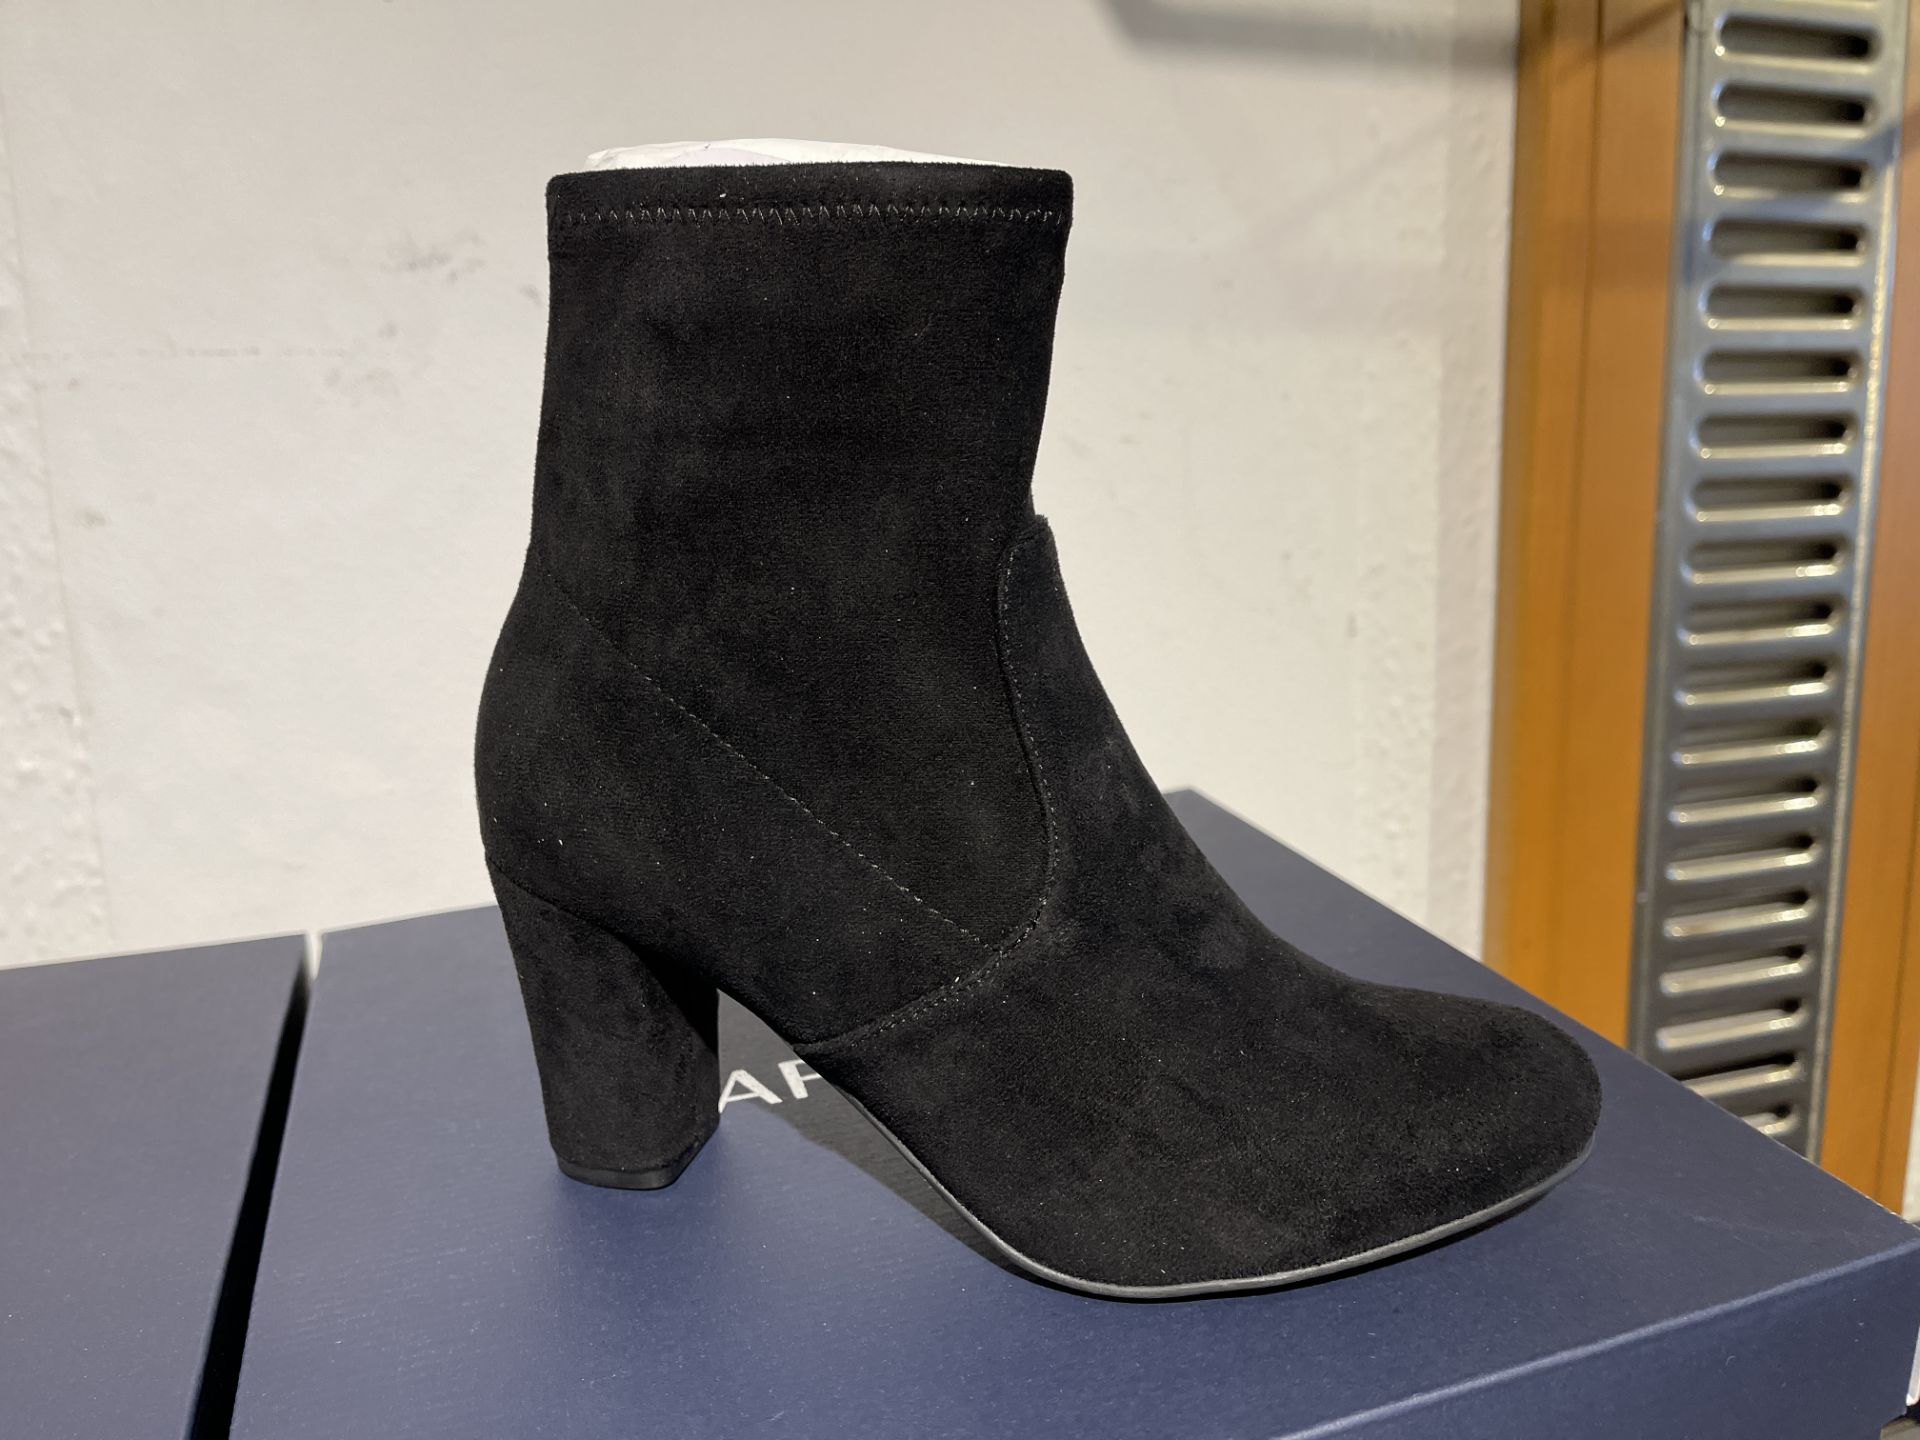 Caprice 13 Pairs: Black Stretch Ankle Boots 9-25300-25 044. Sizes 3 - 6.5 (RRP £59)